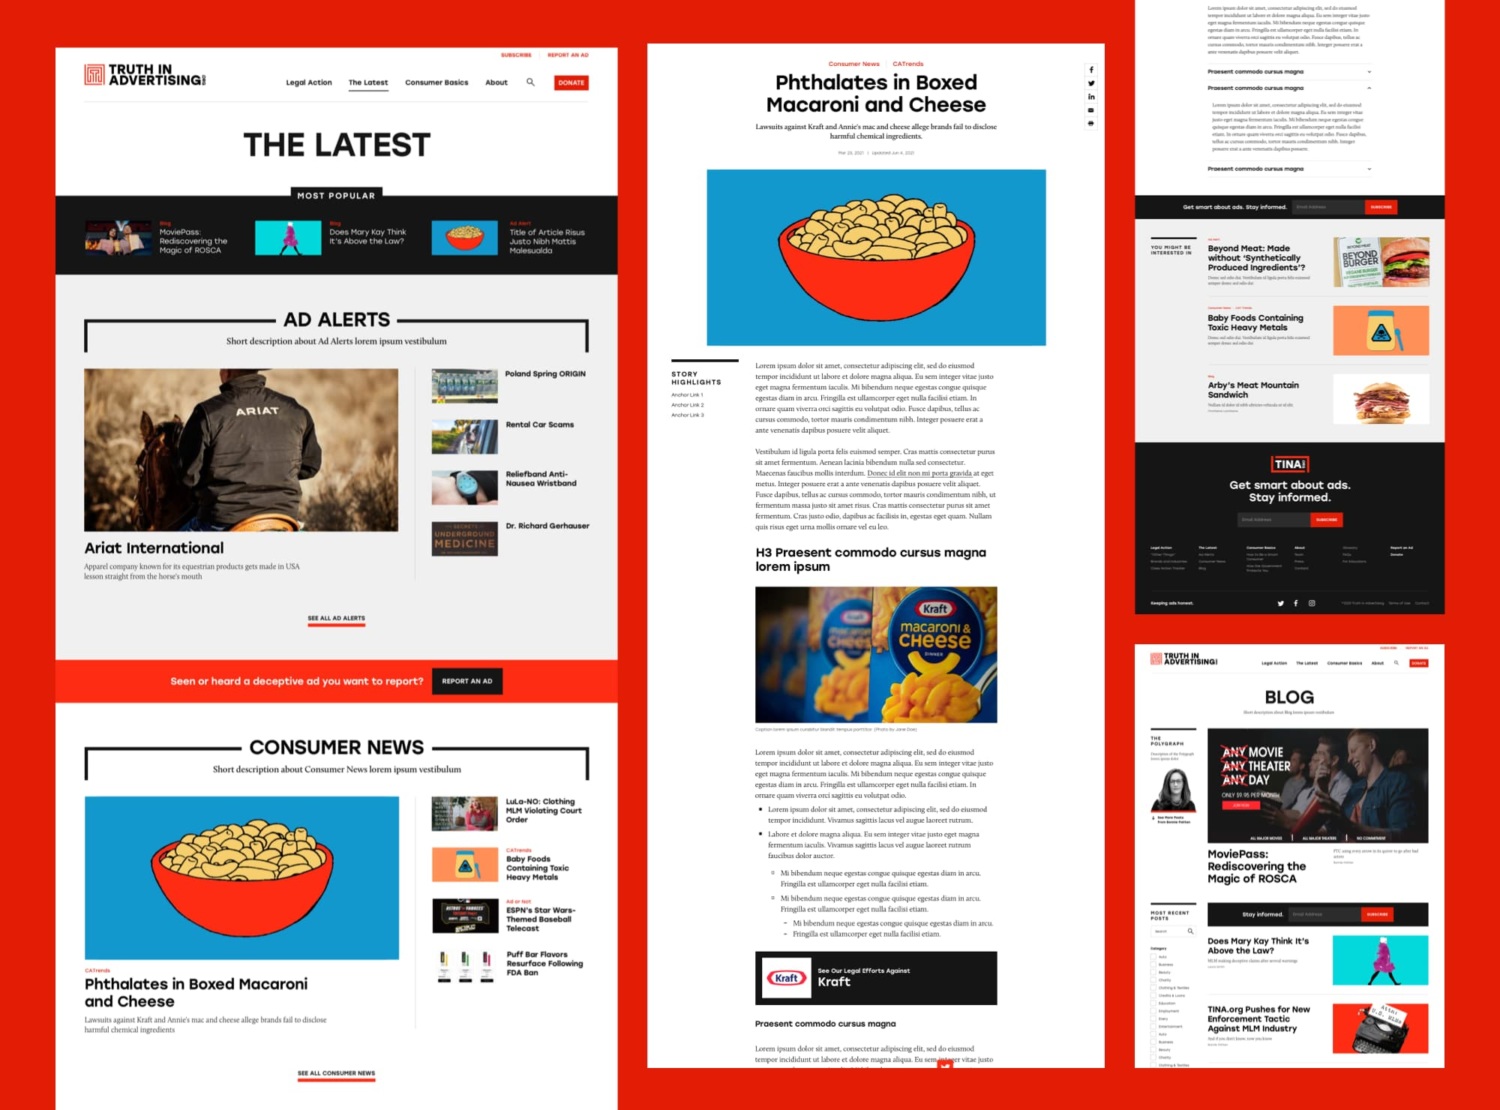 Page designs for TINA's ad coverage through its ad alerts, consumer news, and blog